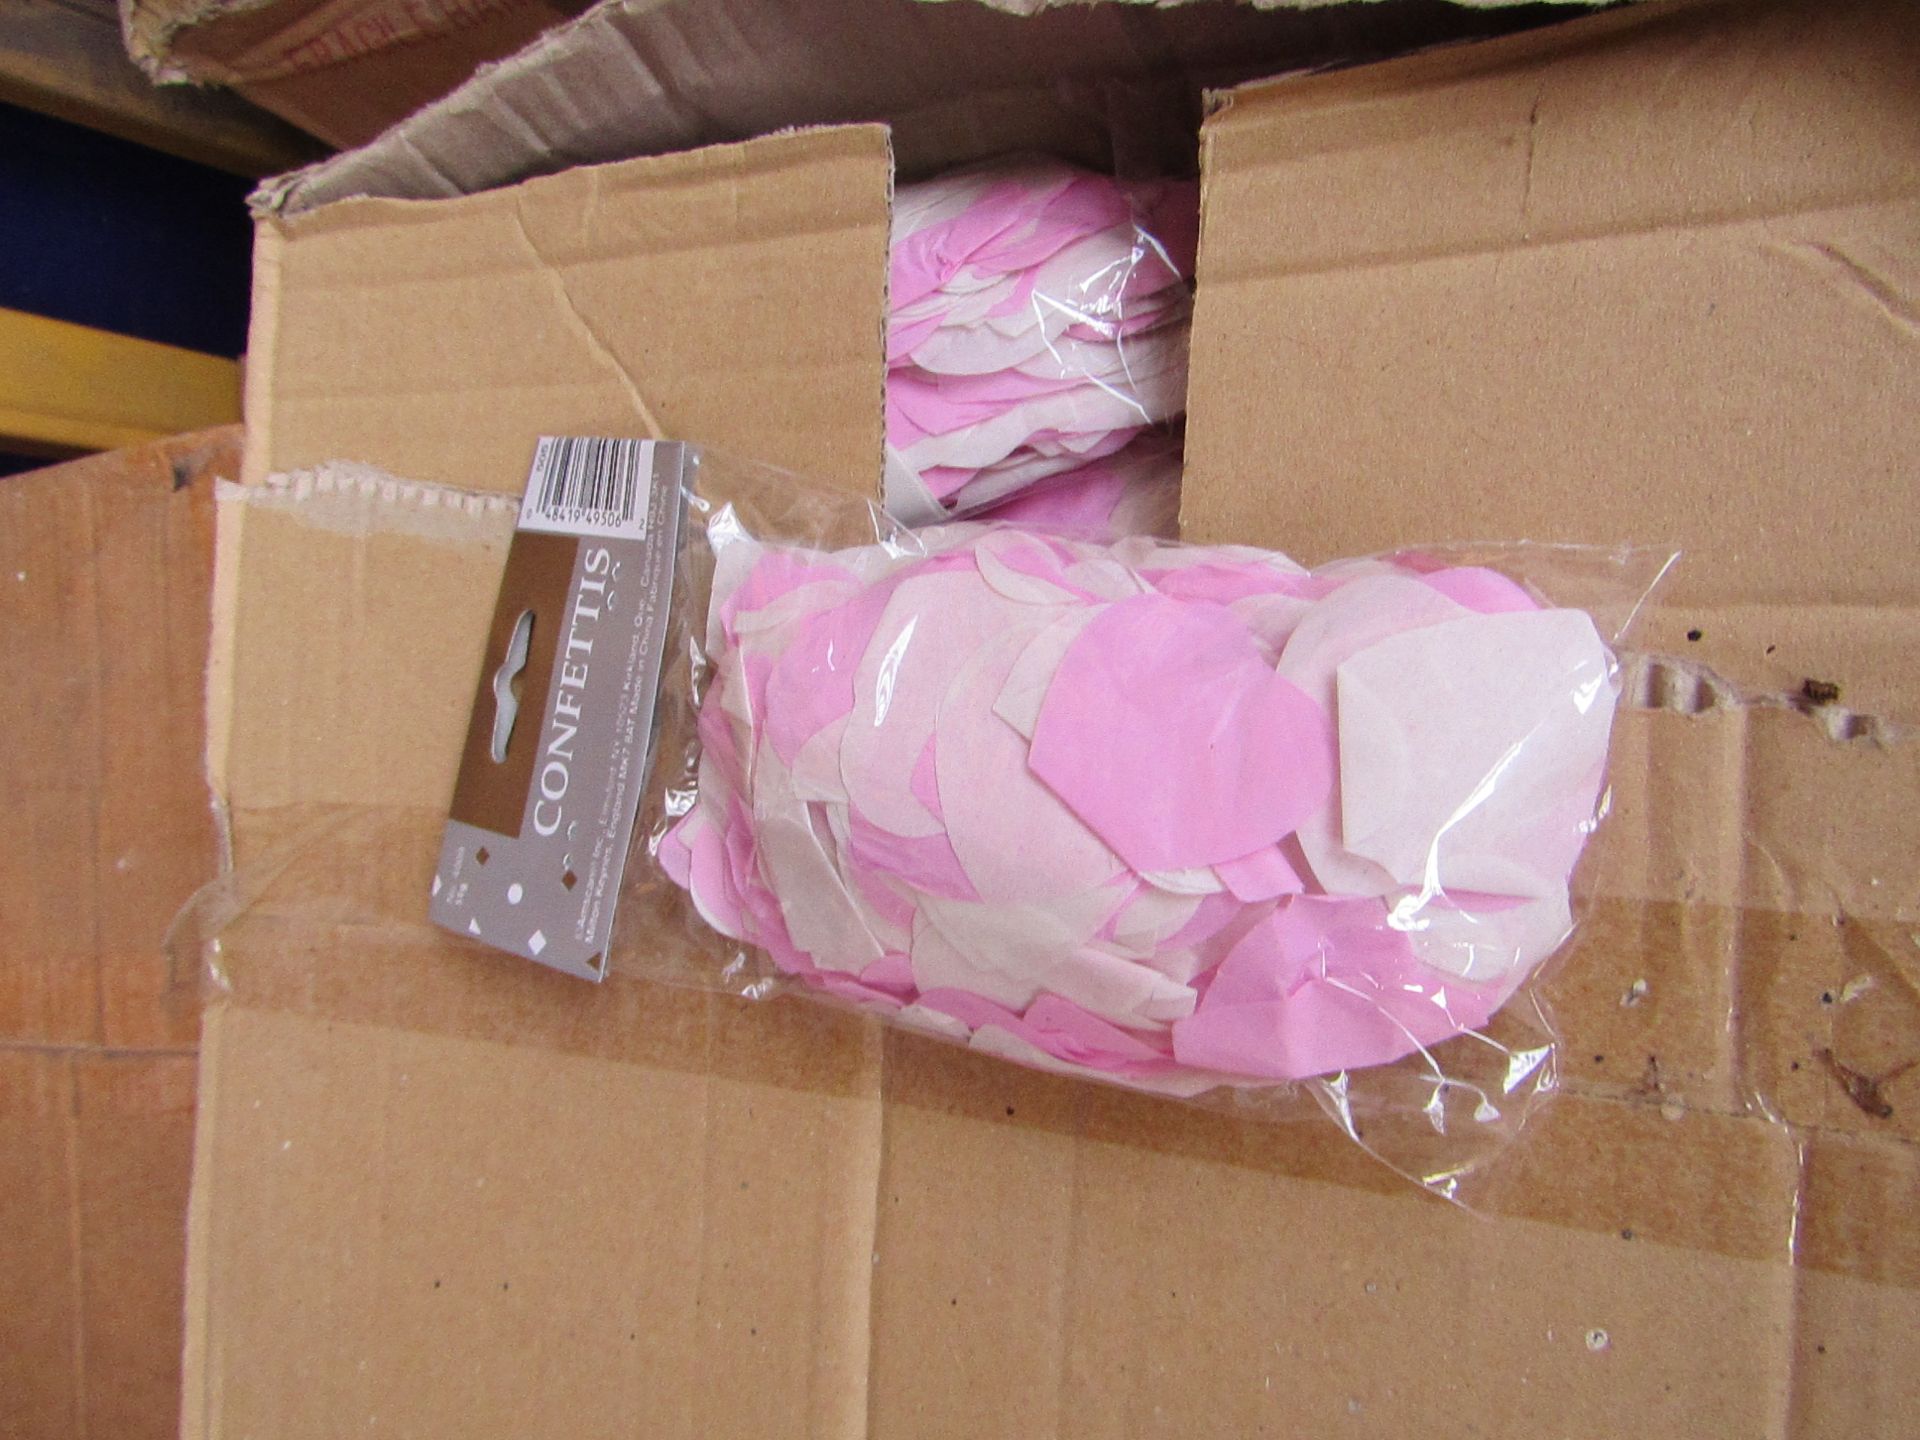 2x Boxes of 24 Rose petal confetti, new and packaged